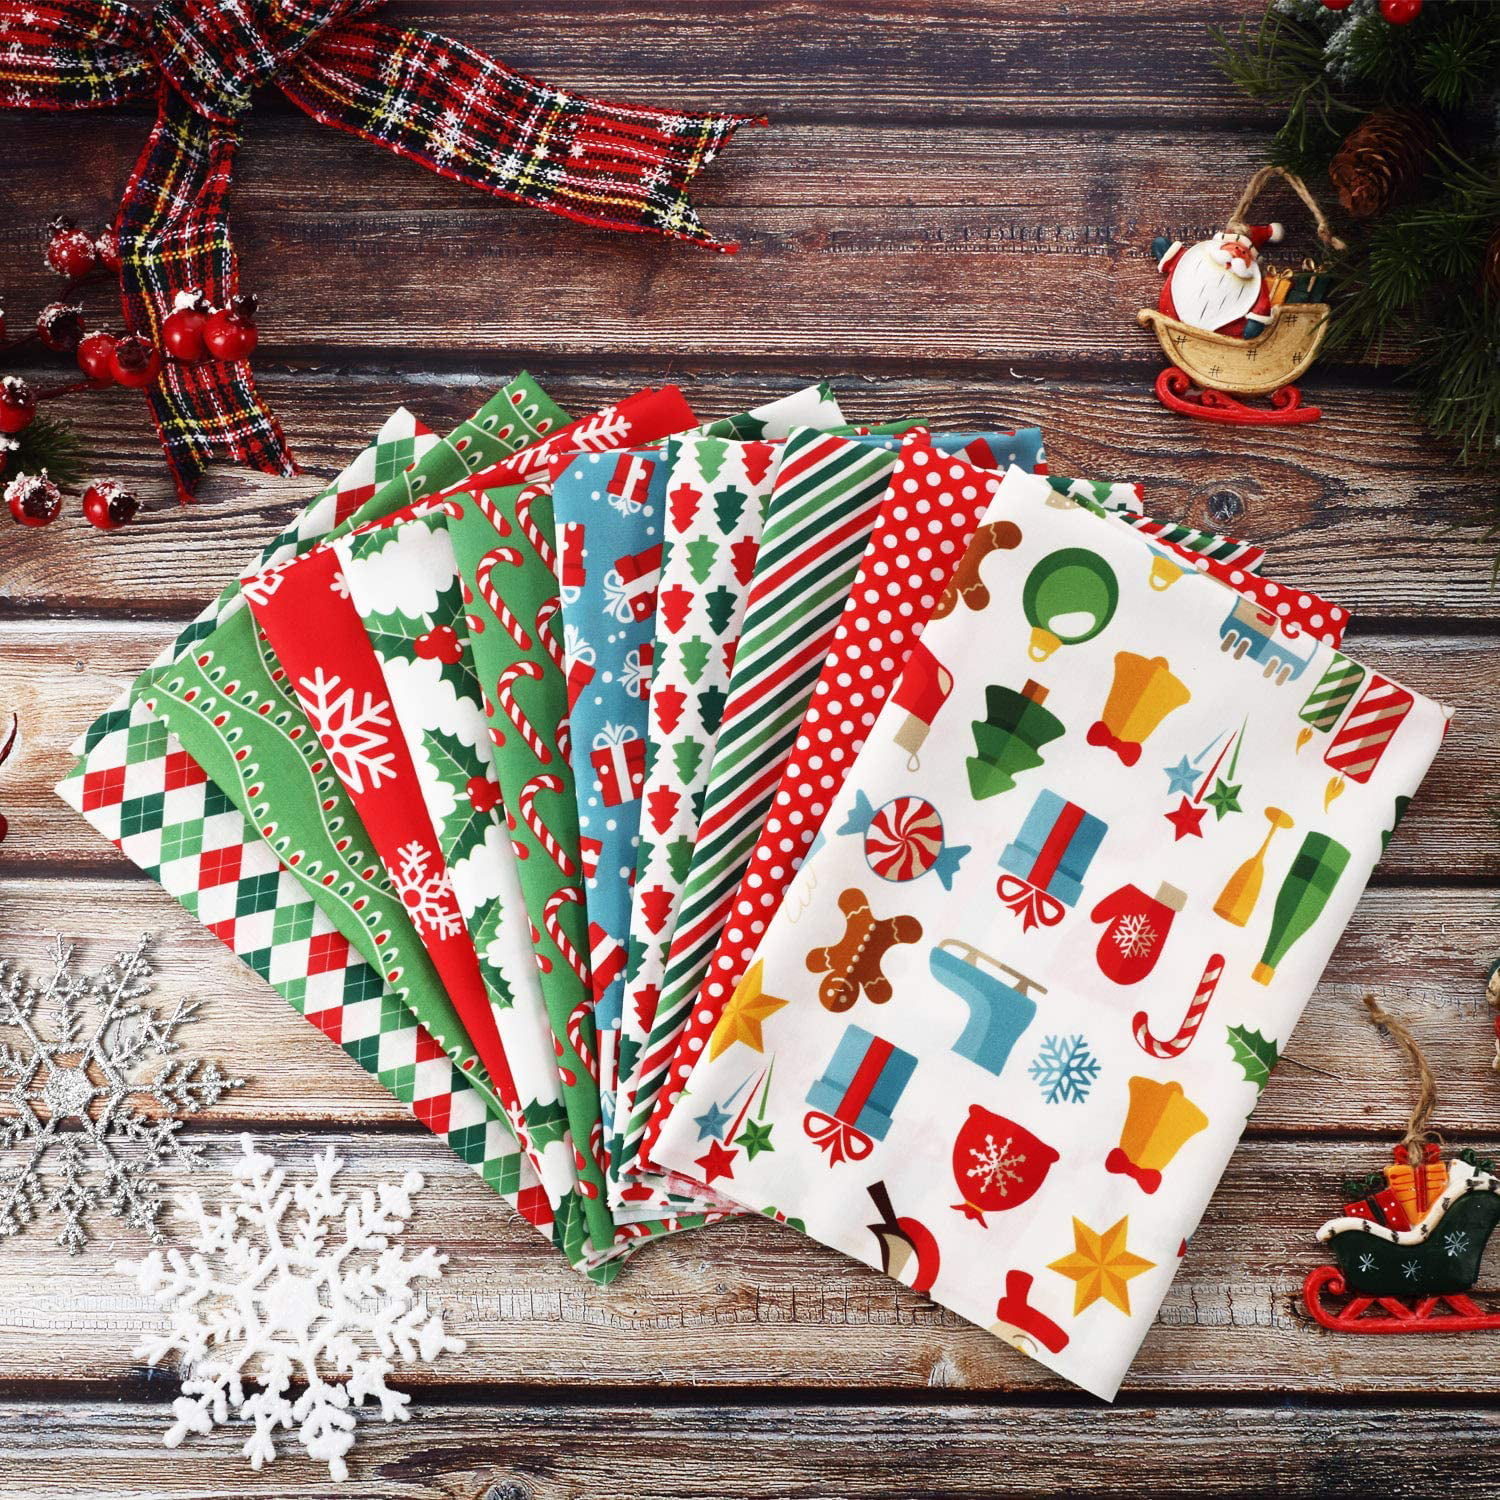  10 Pieces 50 x 50 cm/ 19.68 x 19.68 Inch Christmas Fabric  Squares Quilting Fabric Patchwork Precut Fabric Christmas Snowflake Print  Red Green Fabric for DIY Quilting Xmas Sewing Crafting : Arts, Crafts &  Sewing